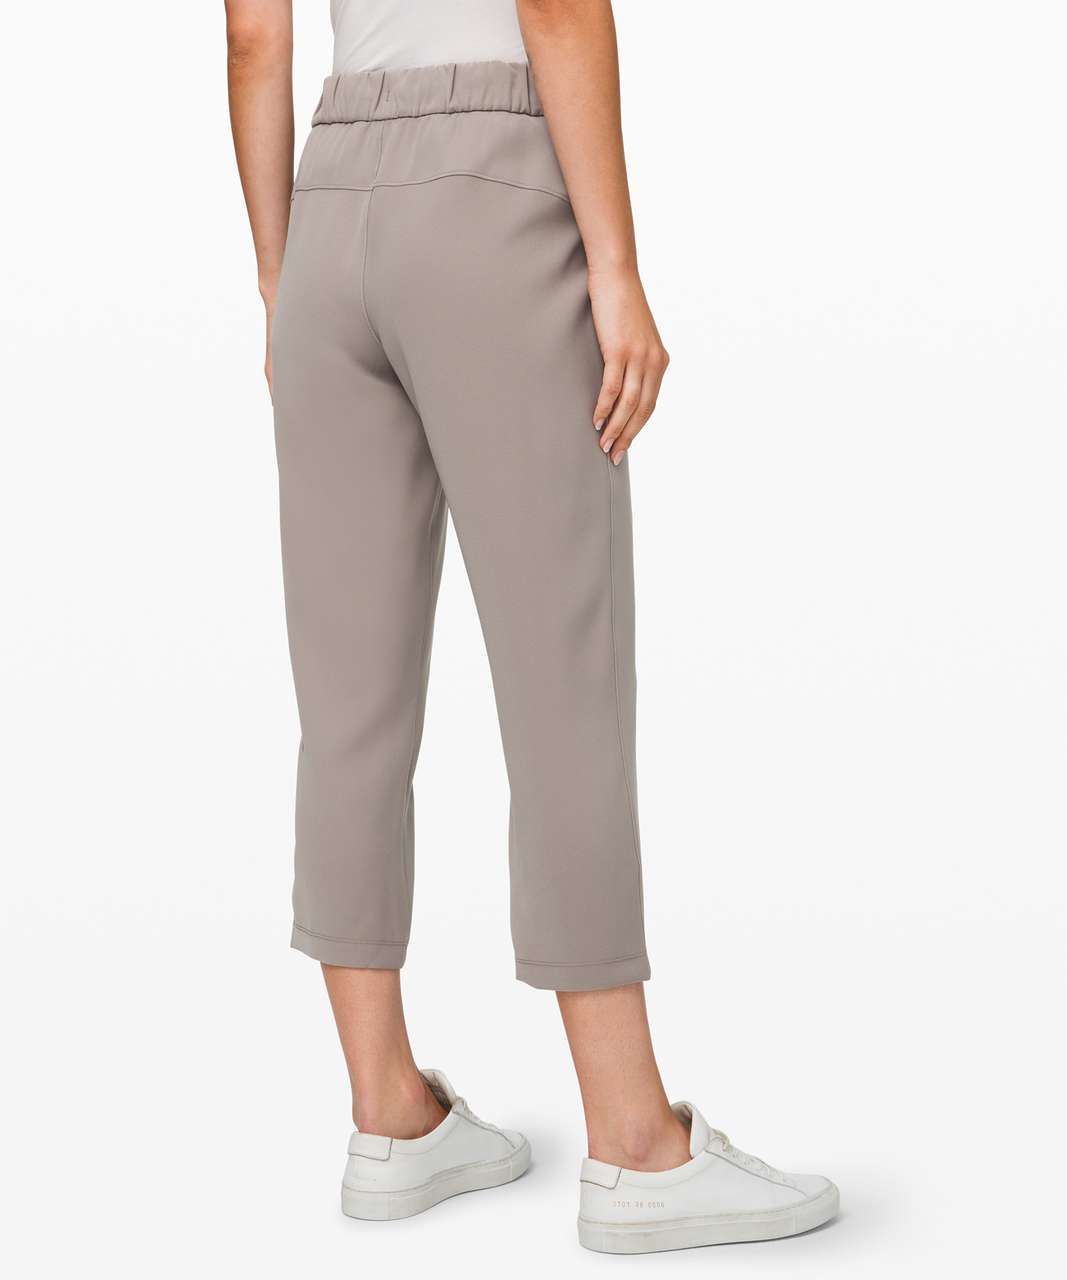 Lululemon On the Fly Crop *Woven 23" - Carbon Dust